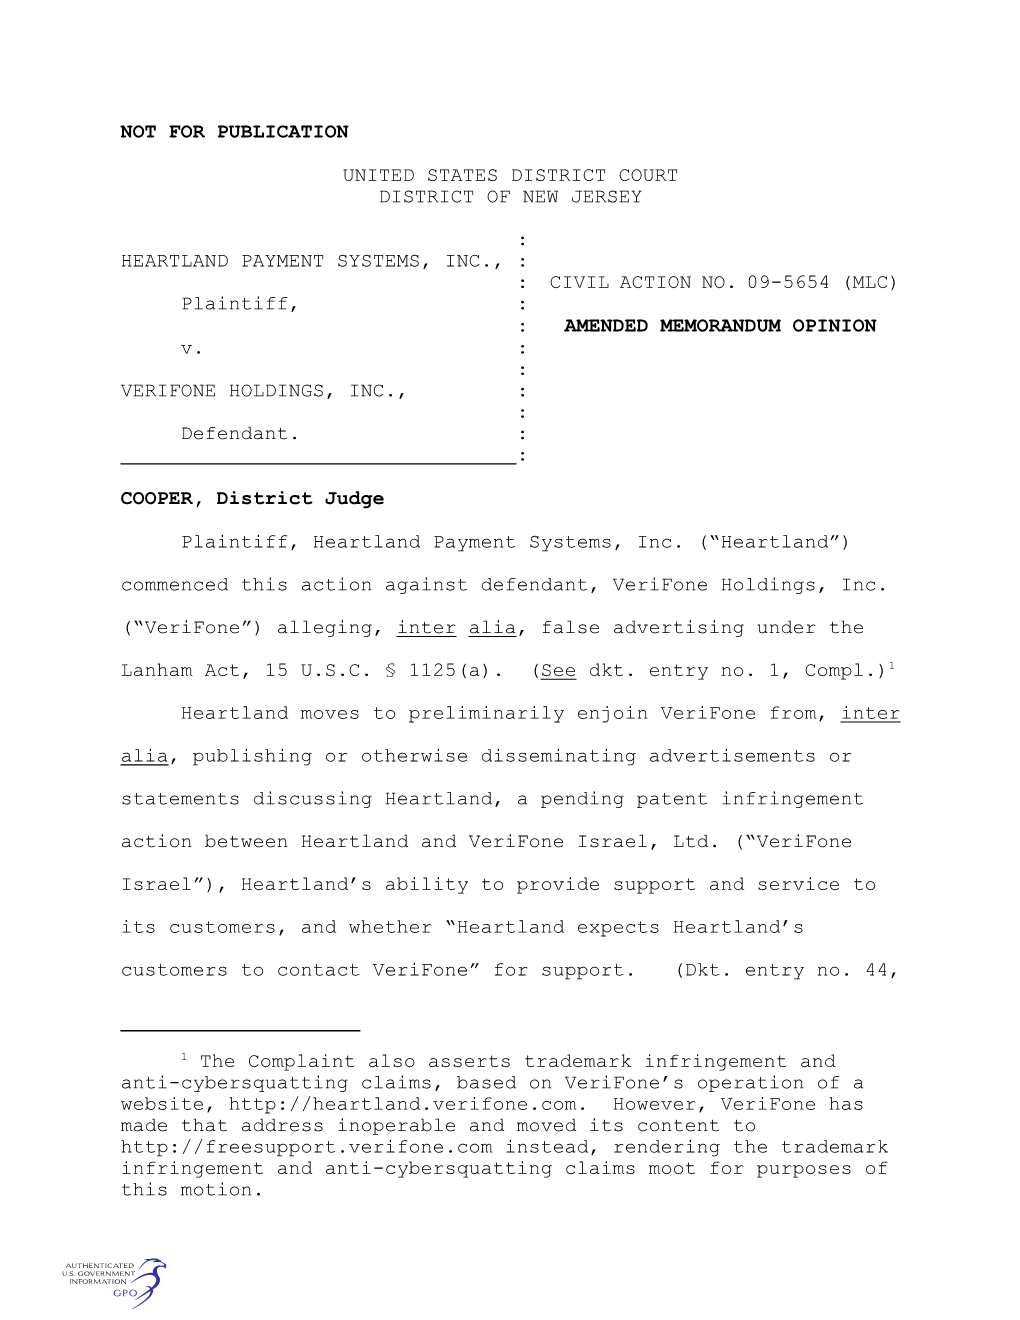 The Complaint Also Asserts Trademark Infringement and Anti-Cybersquatting Claims, Based on Verifone’S Operation of a Website